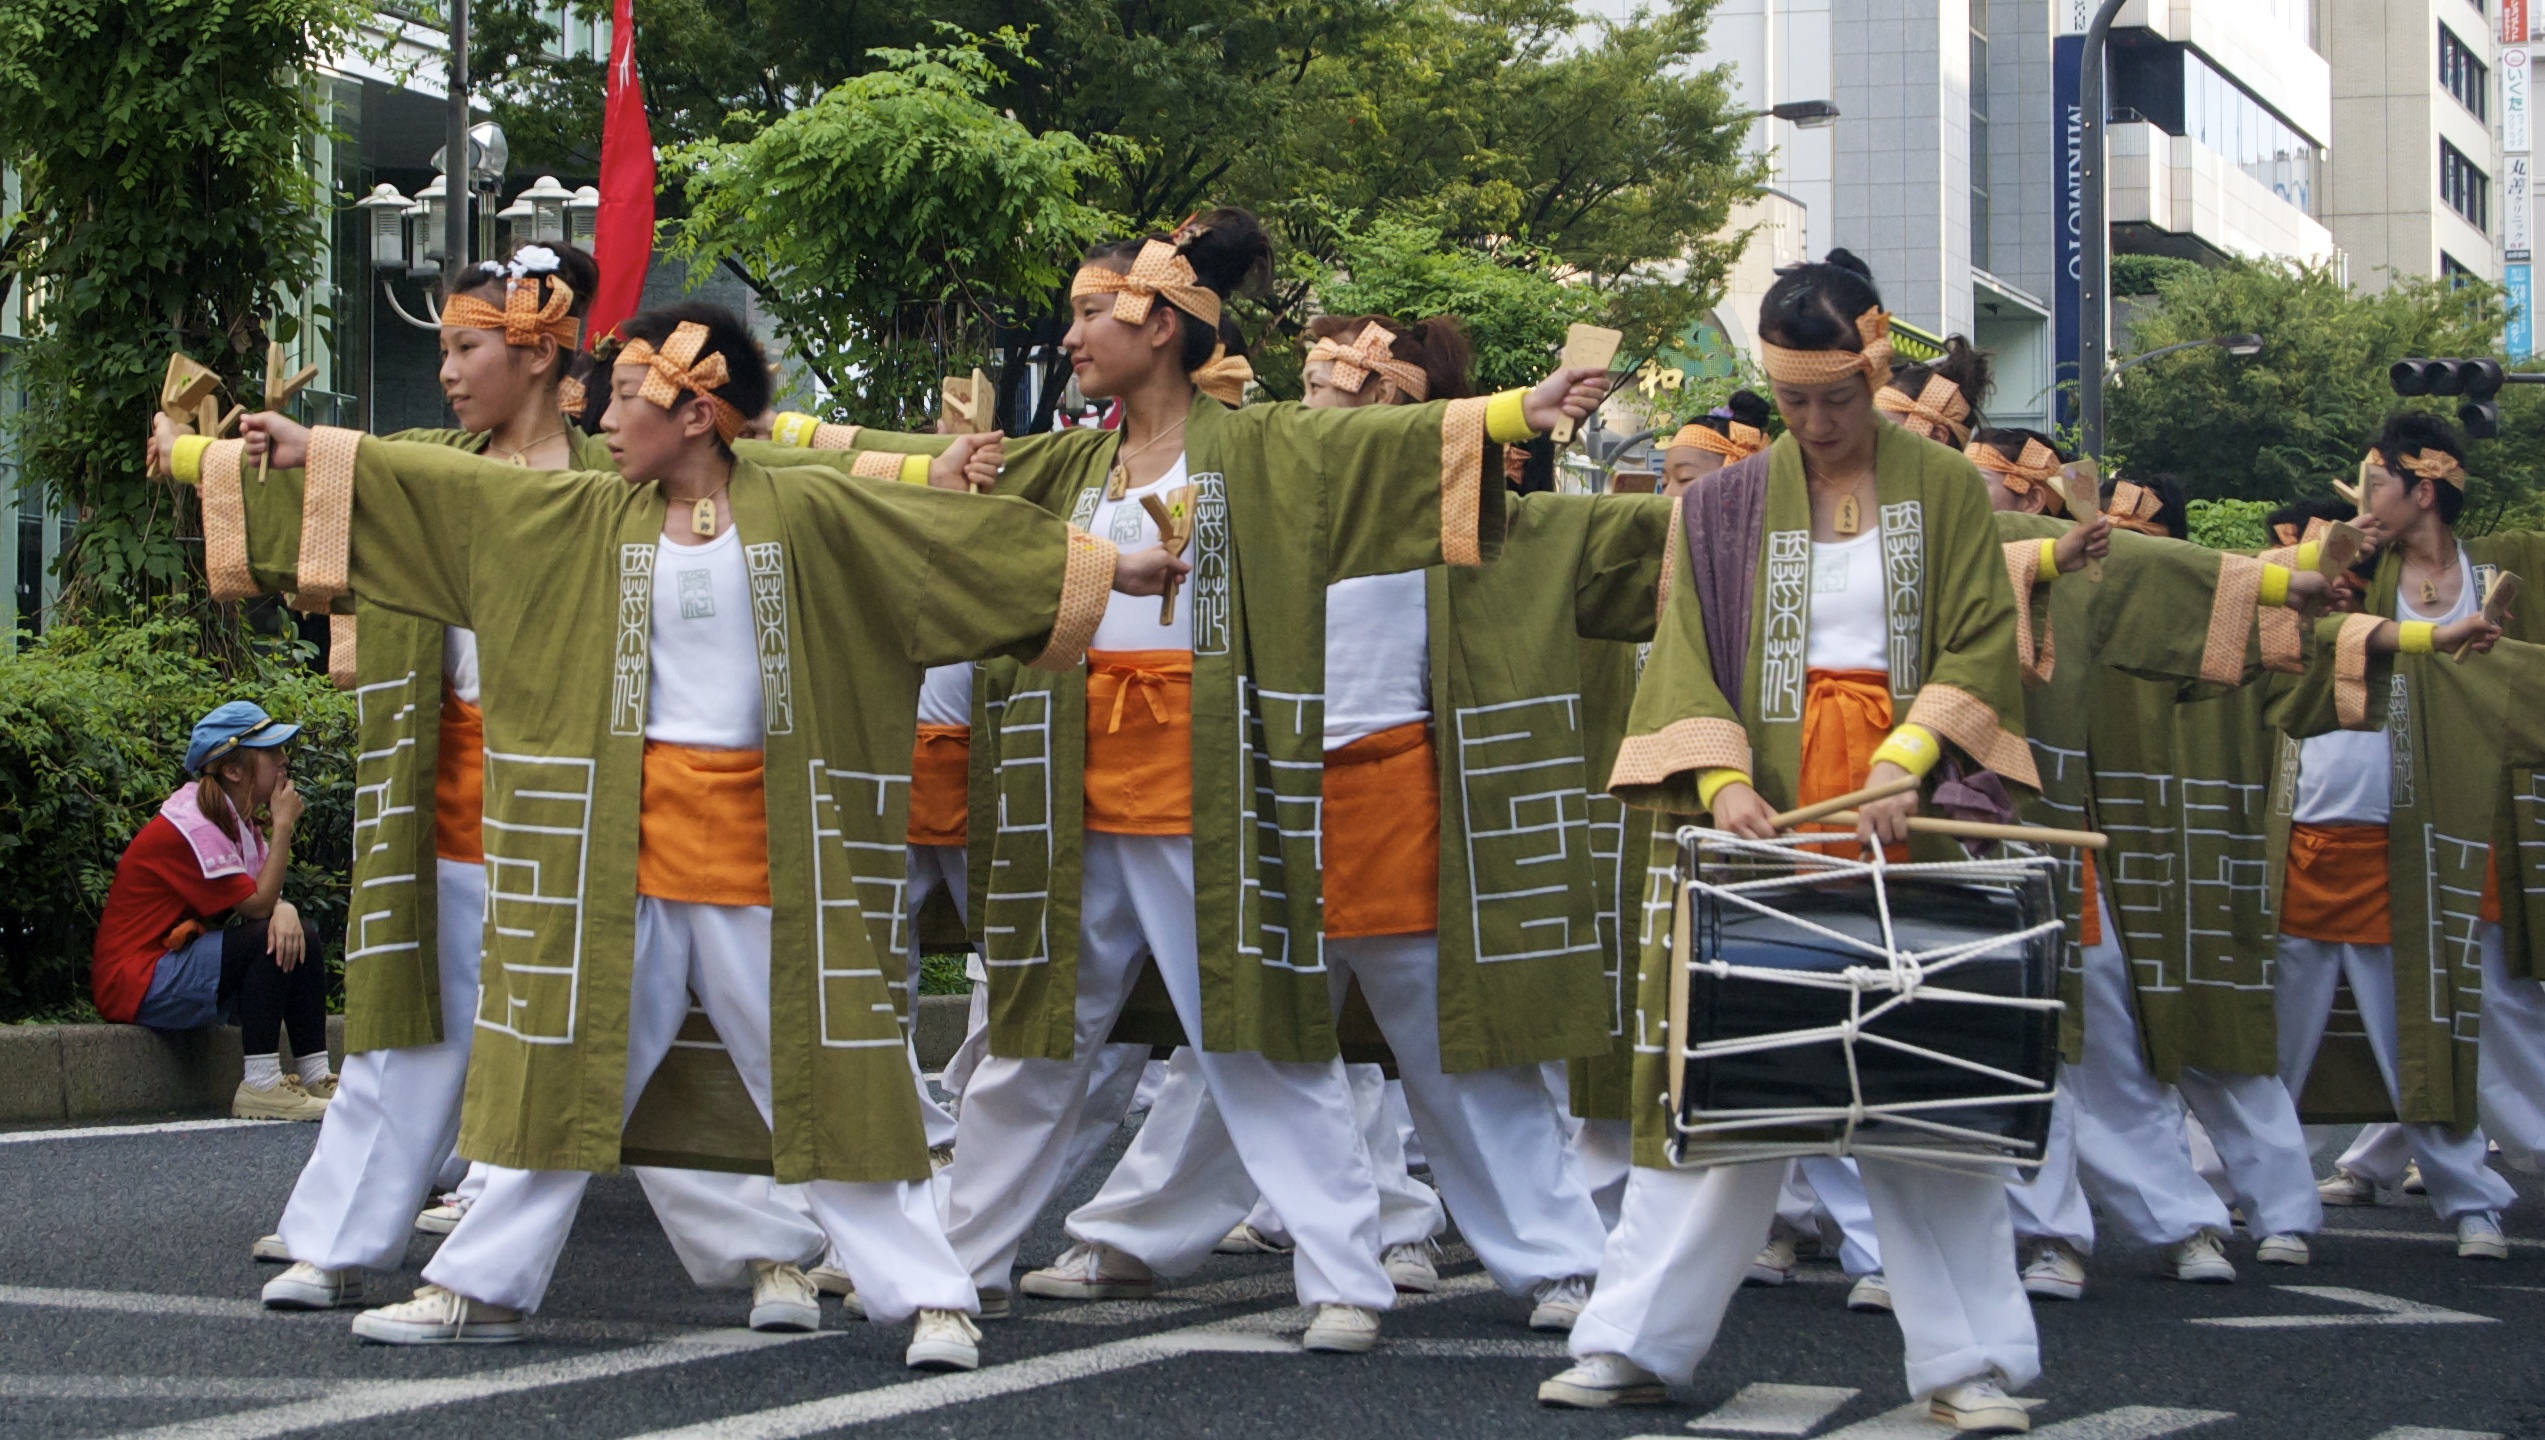 men in costumes with drumming sticks and drum drums